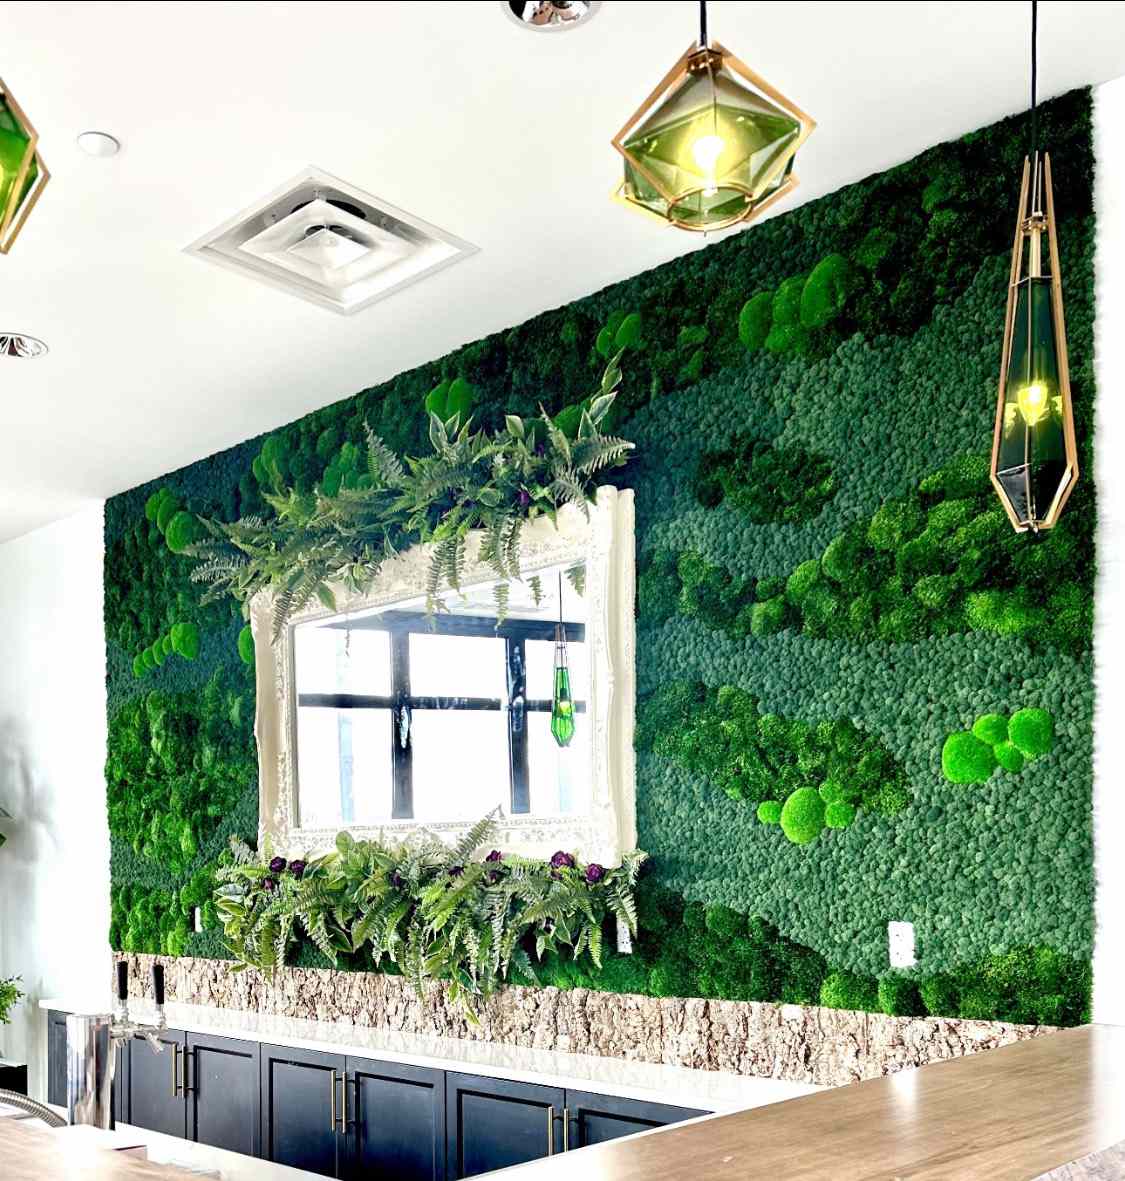 Living wall art installation above countertops by Planthropy